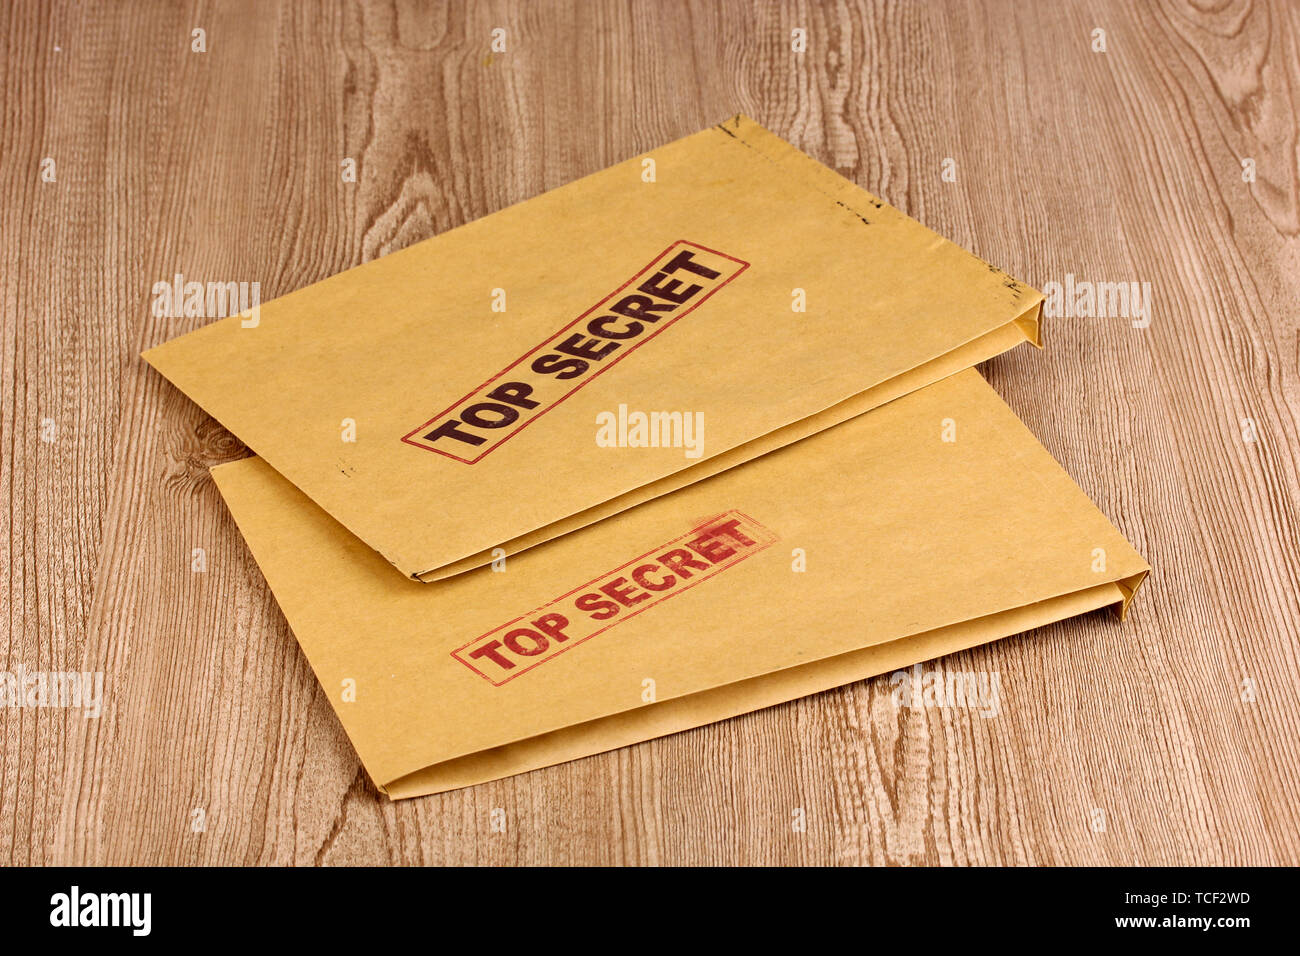 Envelopes with top secret stamp on wooden background Stock Photo